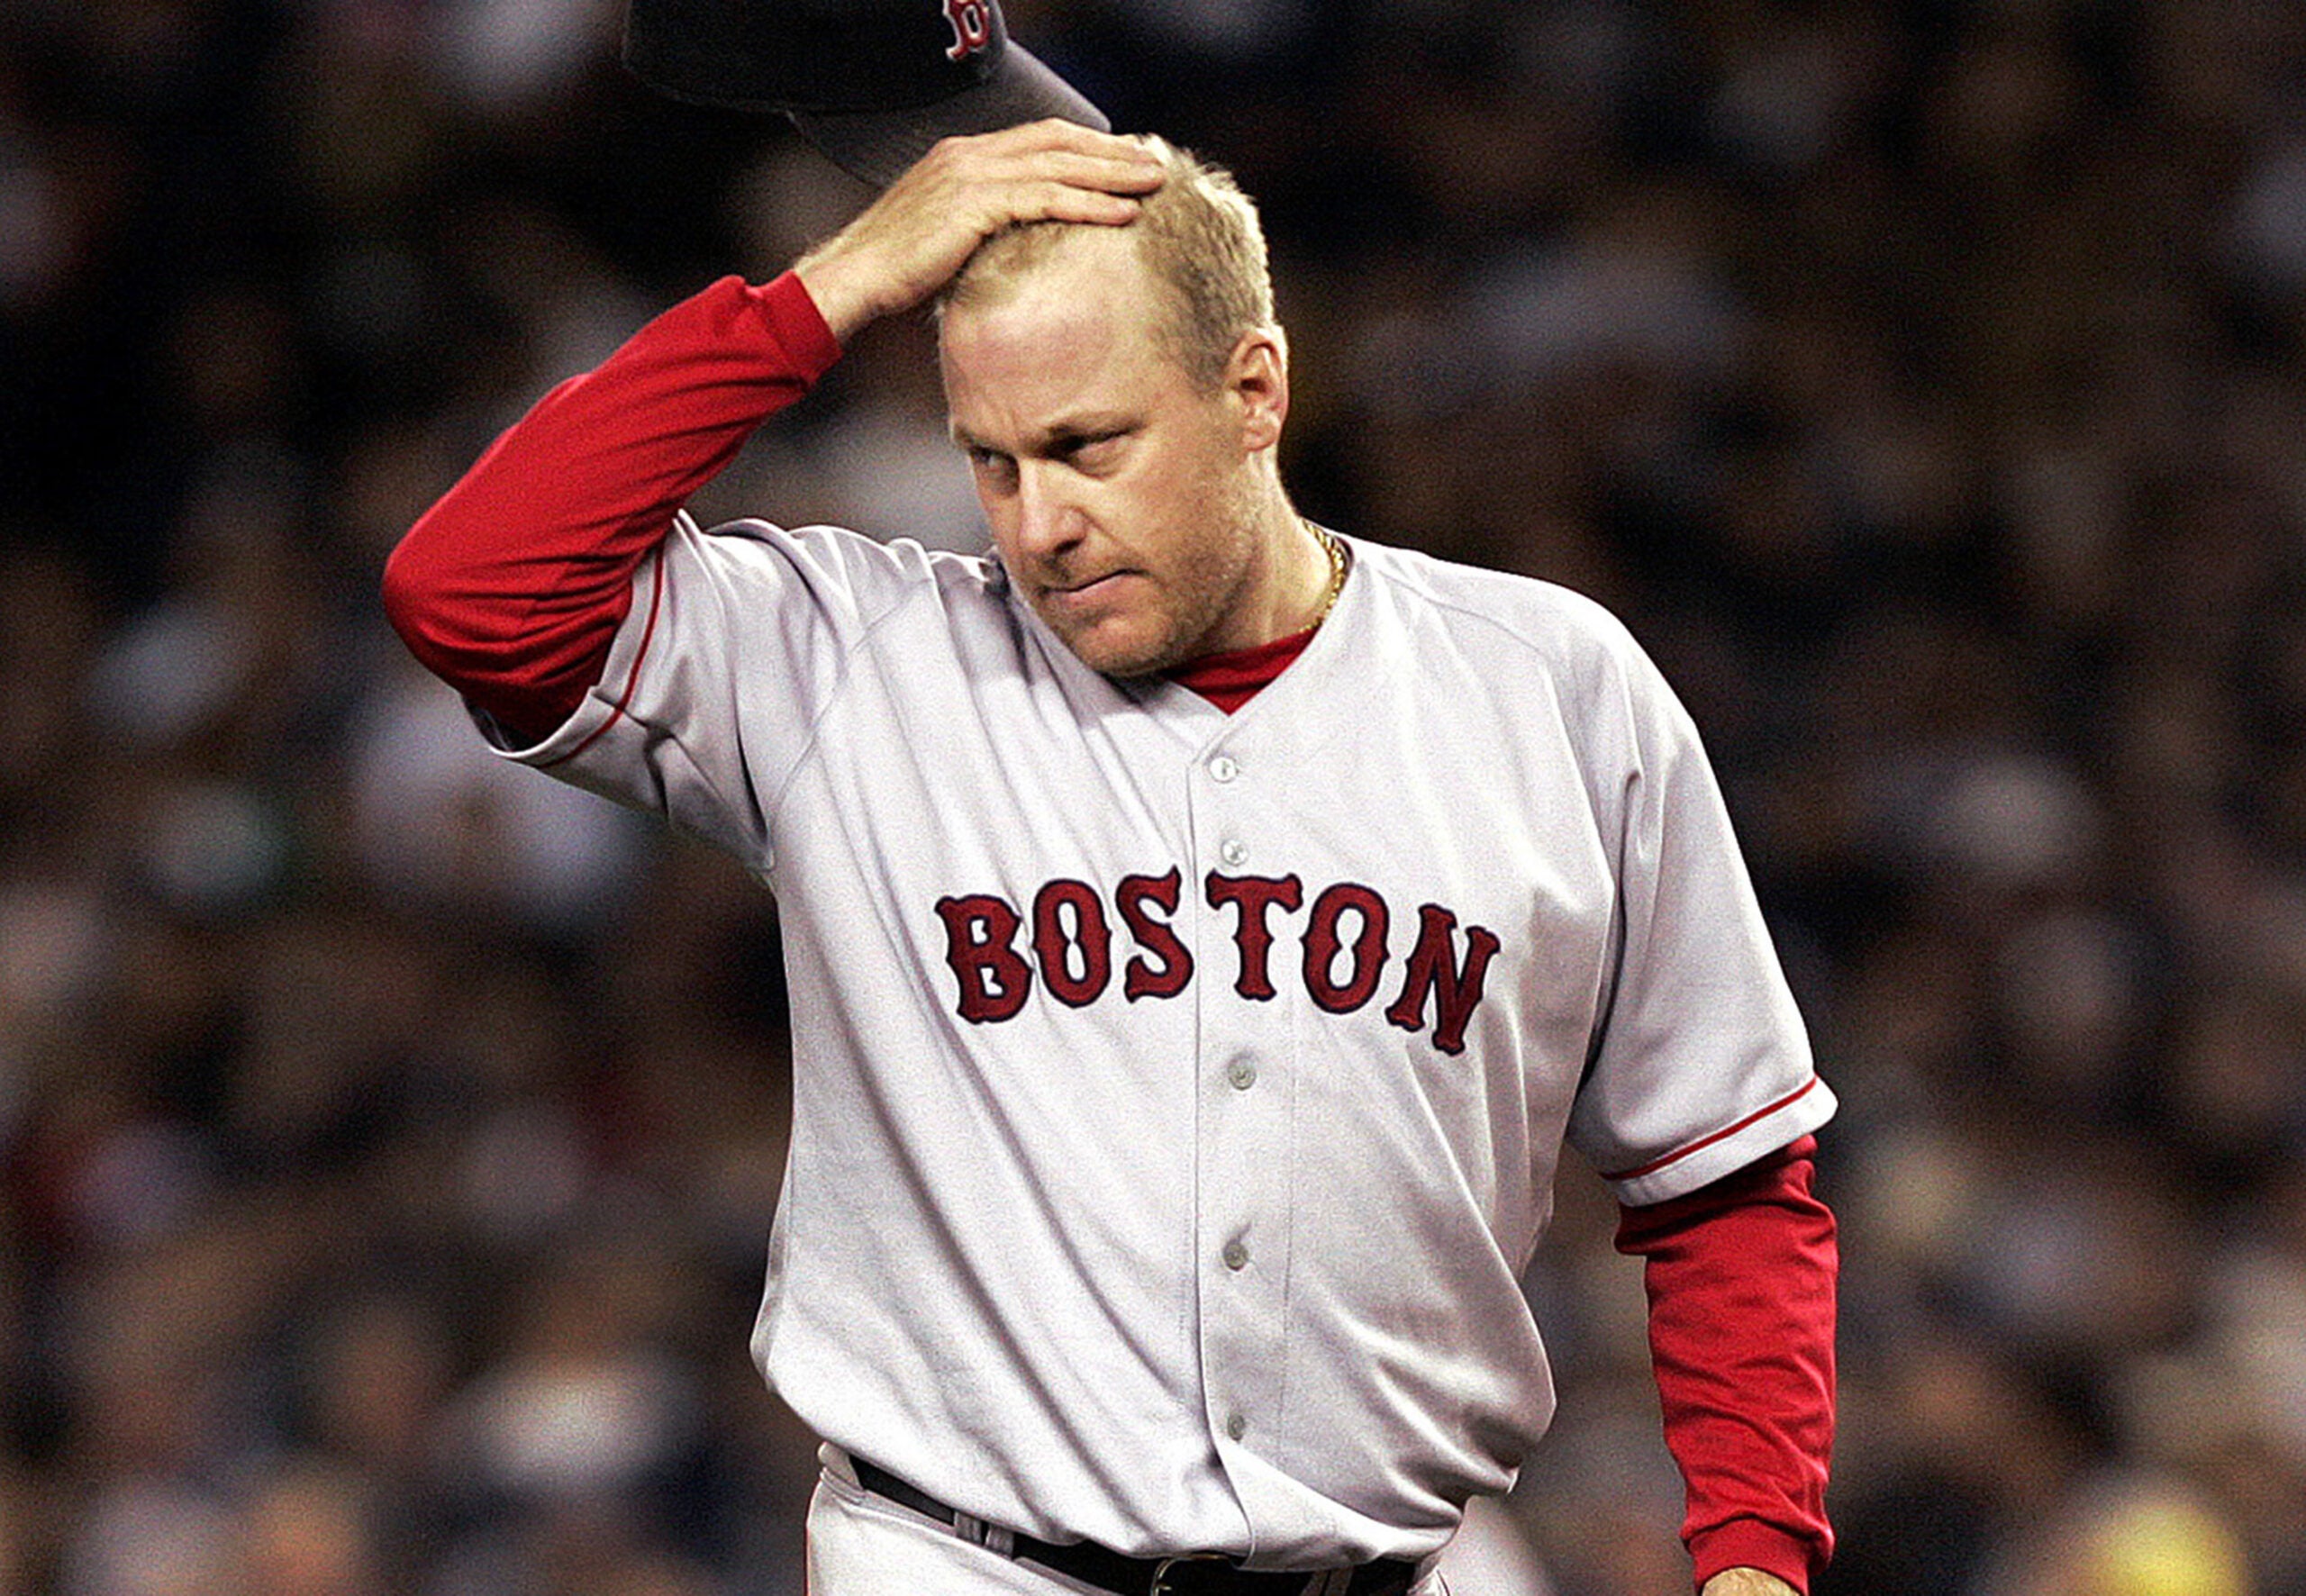 Former Red Sox pitcher Curt Schilling asked Hall of Fame not to include him  on next year's ballot